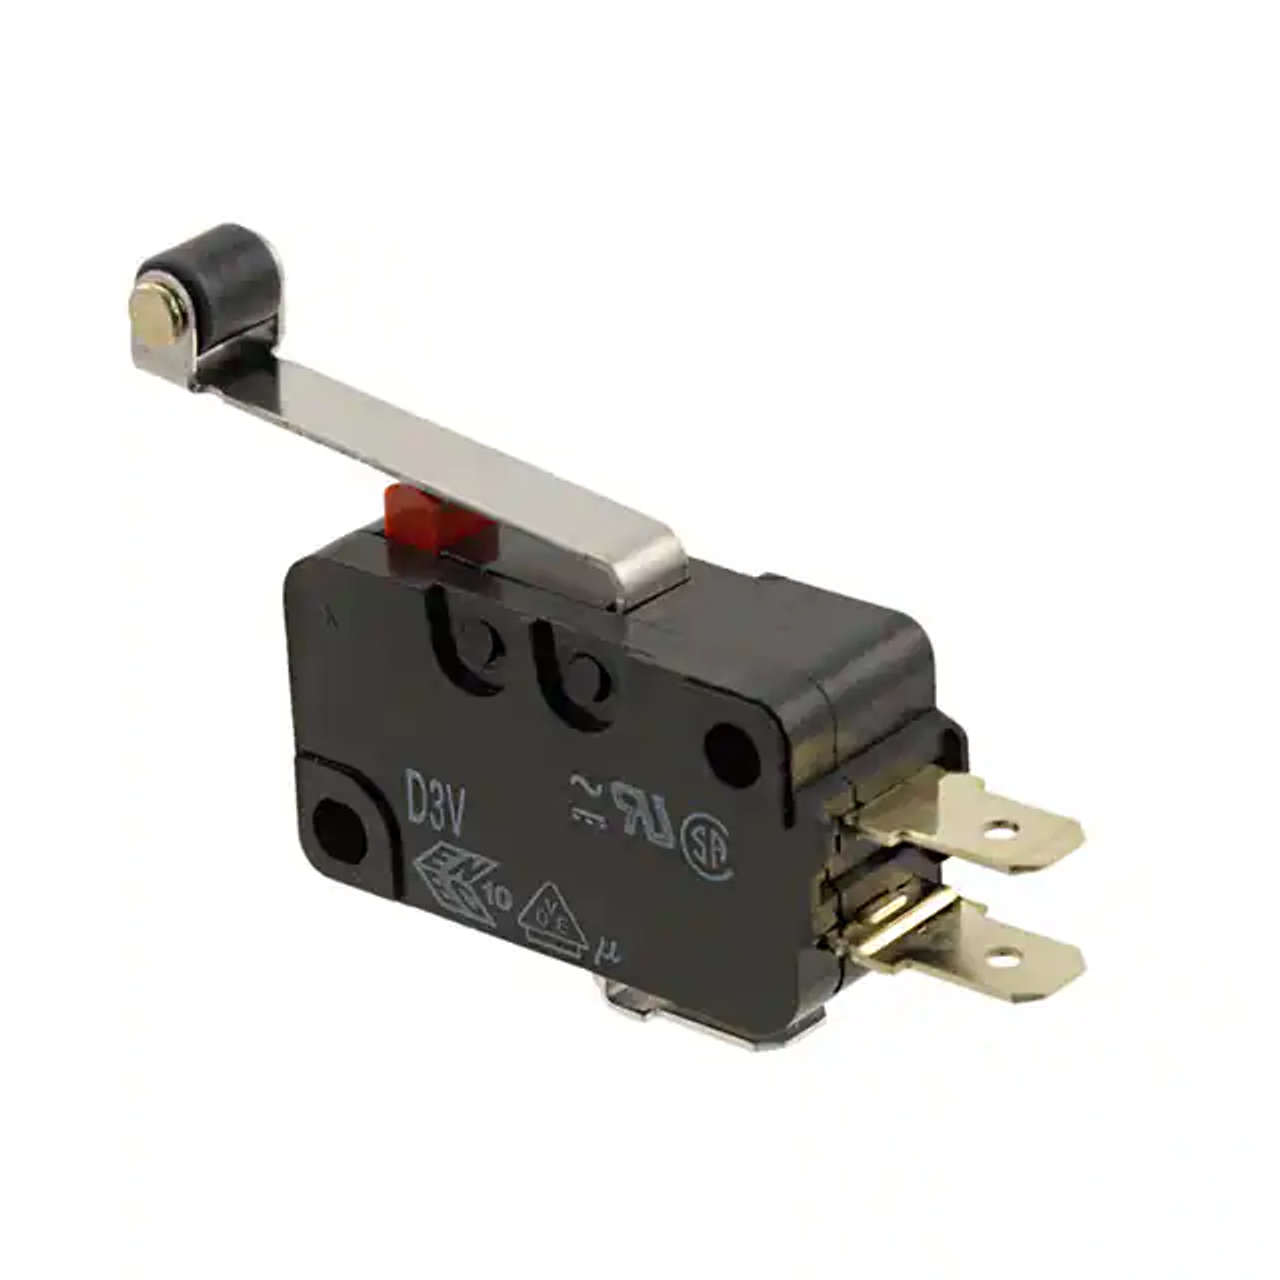 Omron D3V-165M-2C5 Basic, Snap-Action Switches